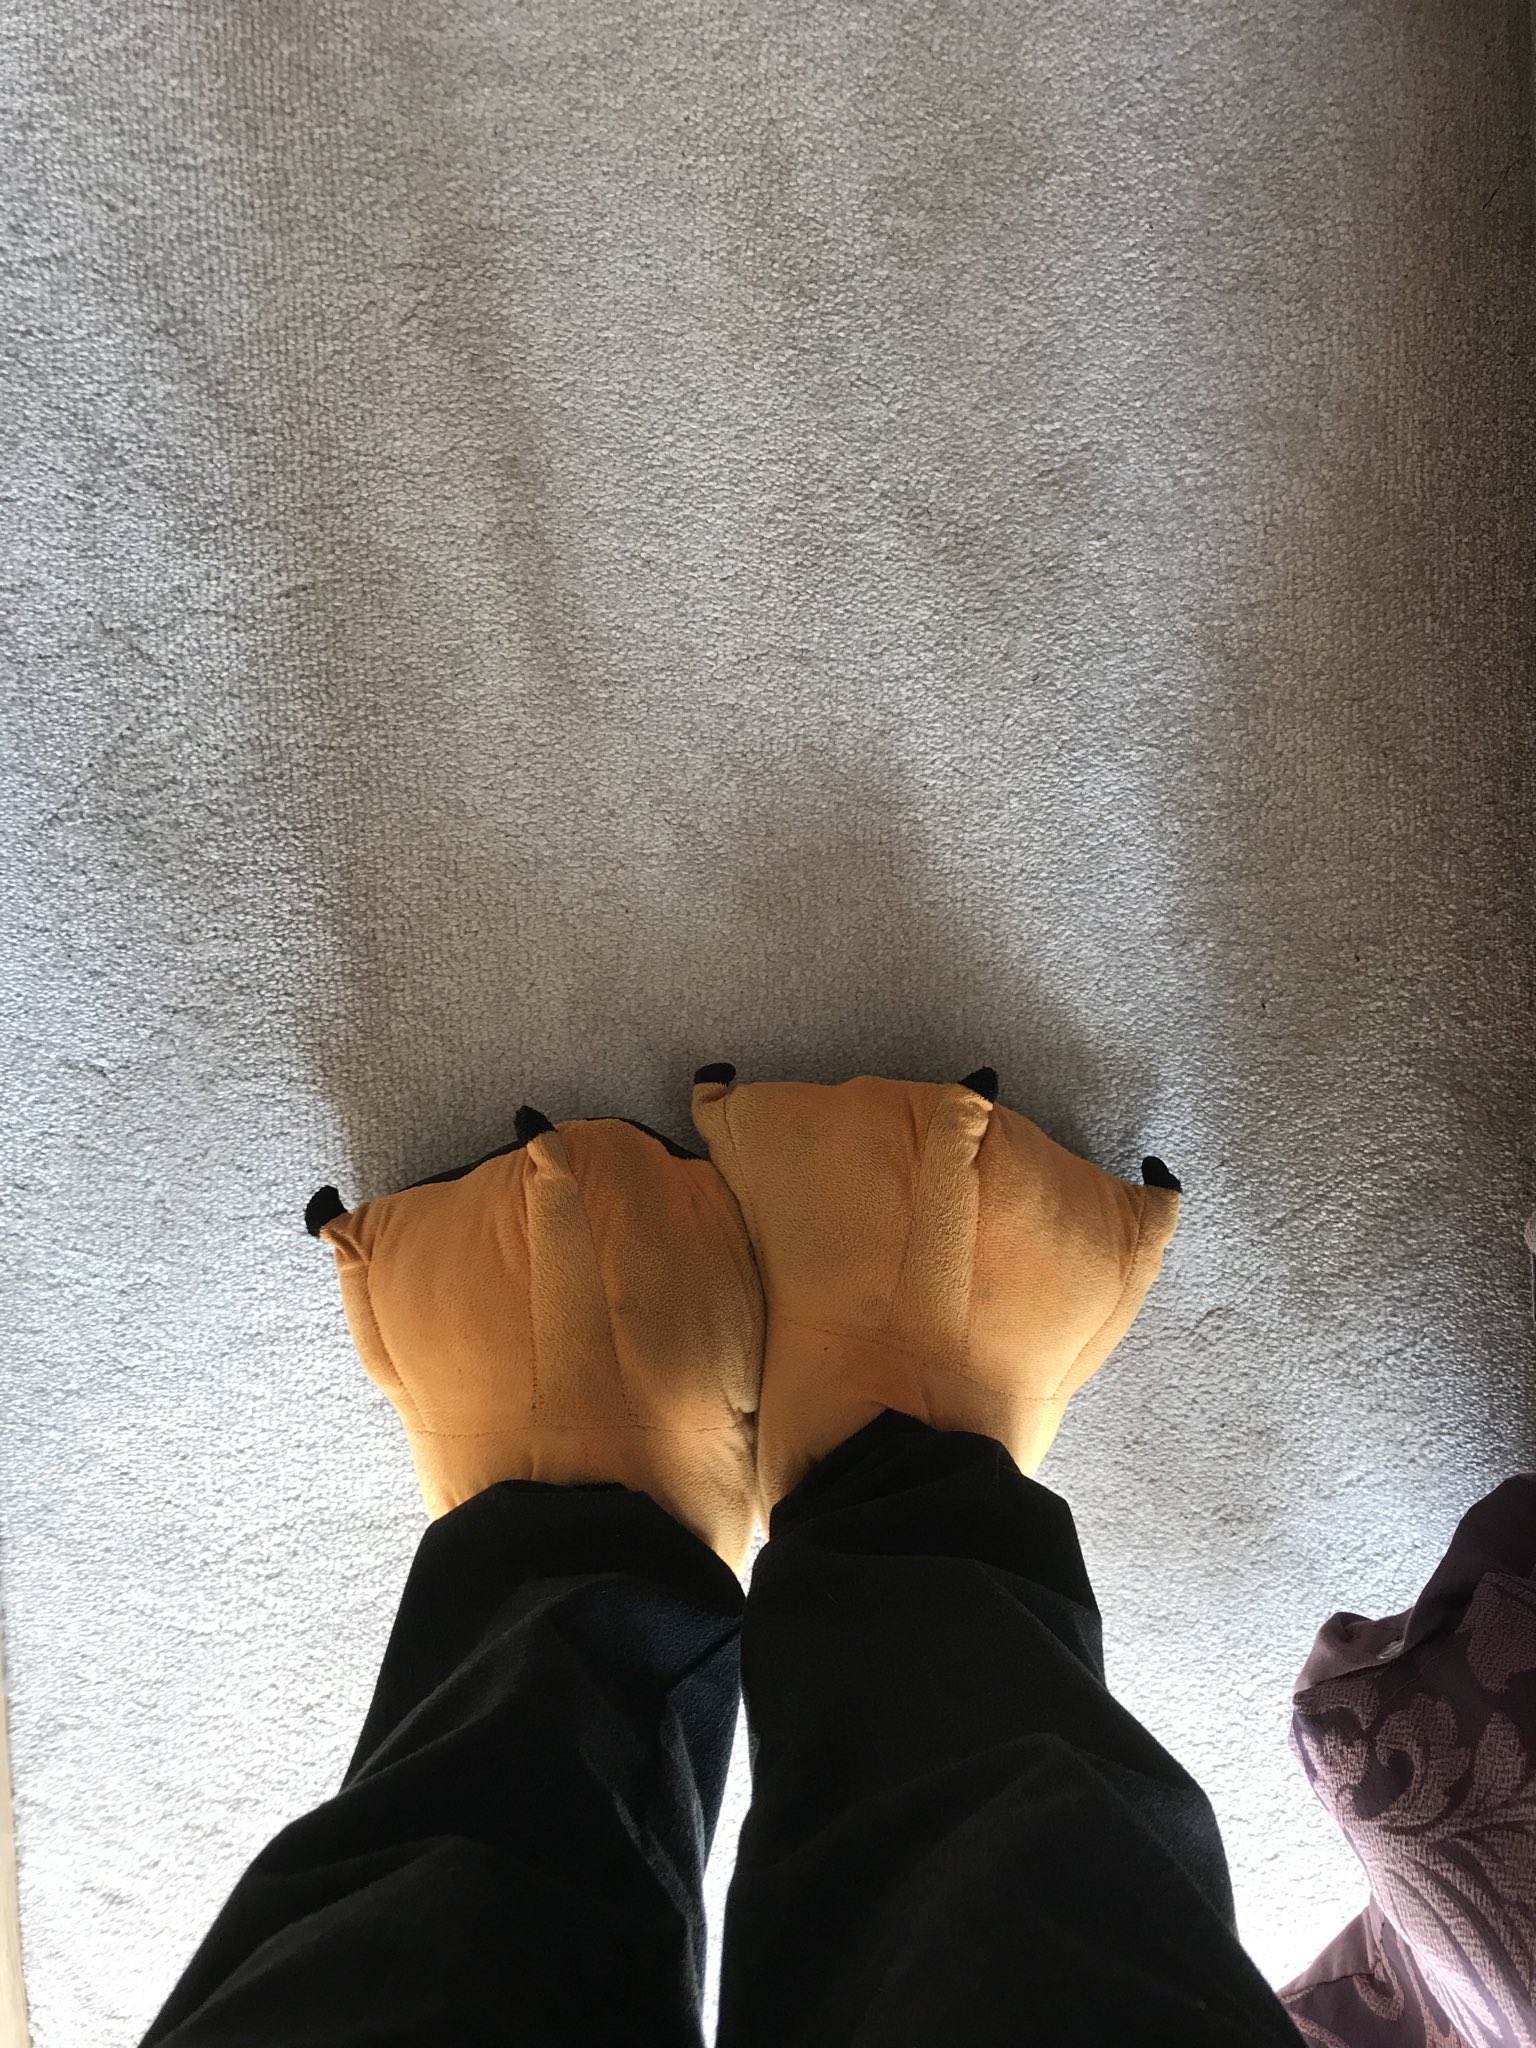 Michelle Heeley KC on Twitter: "This well be the first and only time I get to wear duck feet to a court hearing. X